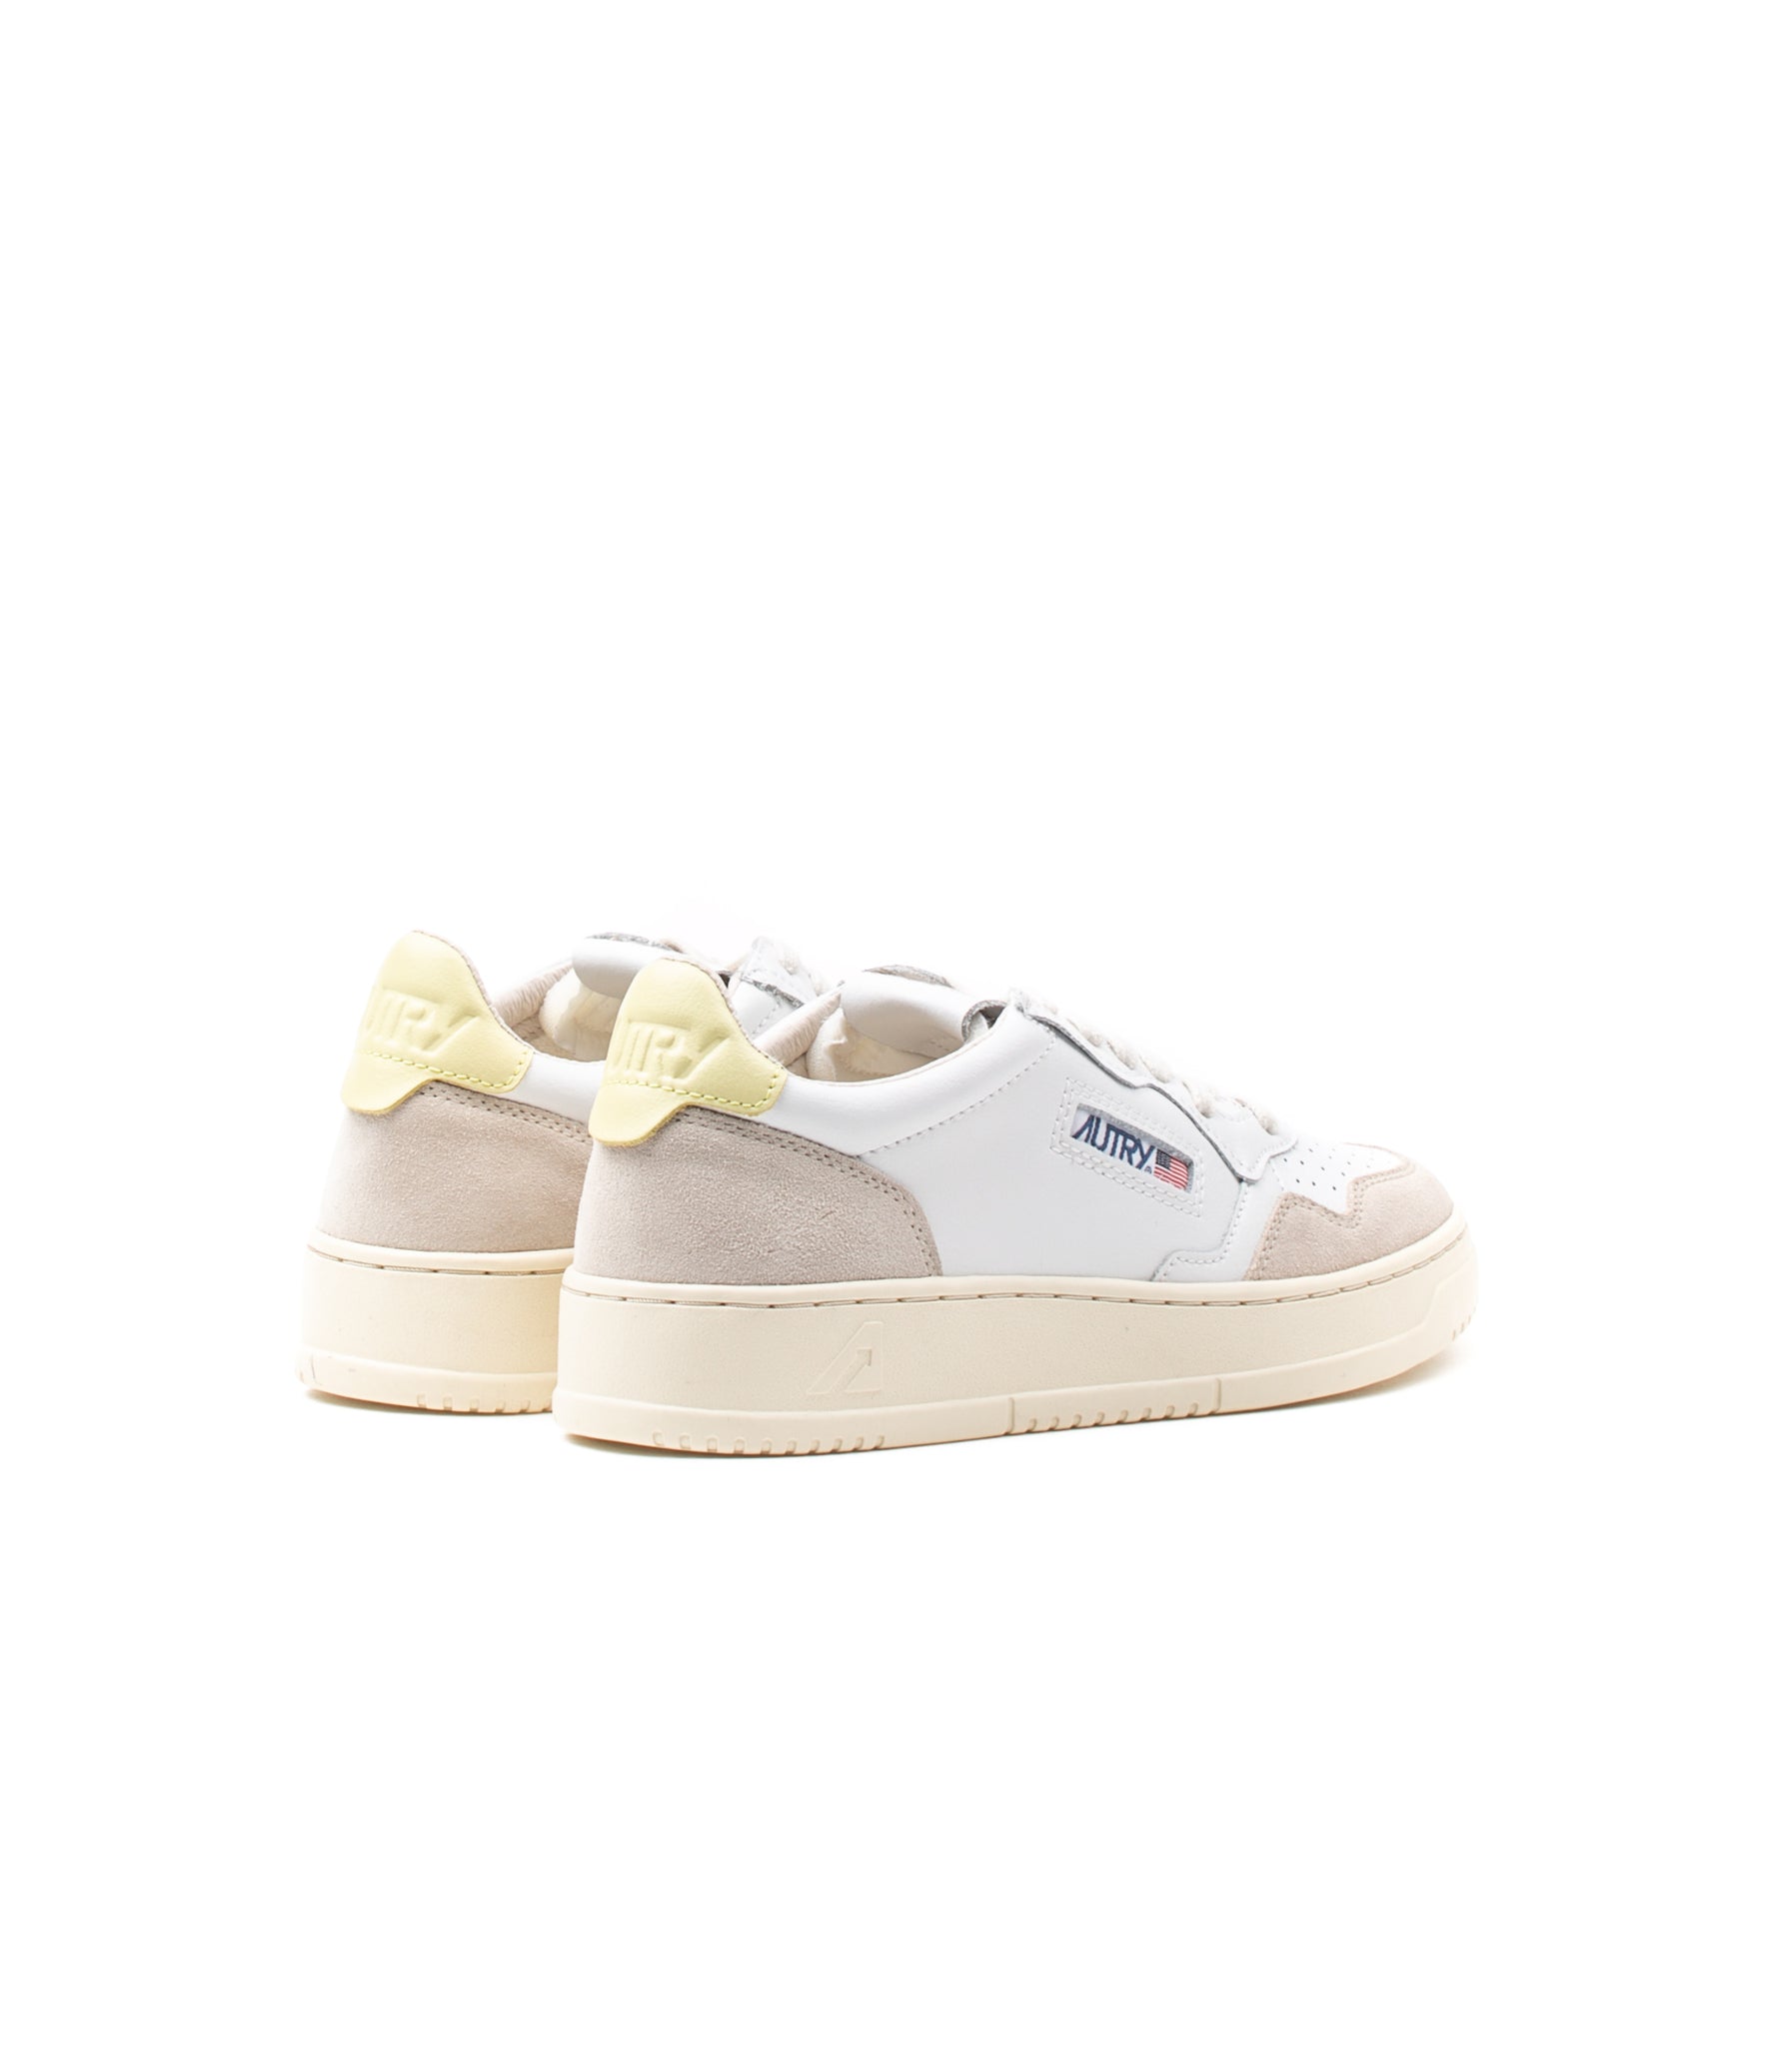 Autry Medalist Low Bianco Giallo Donna